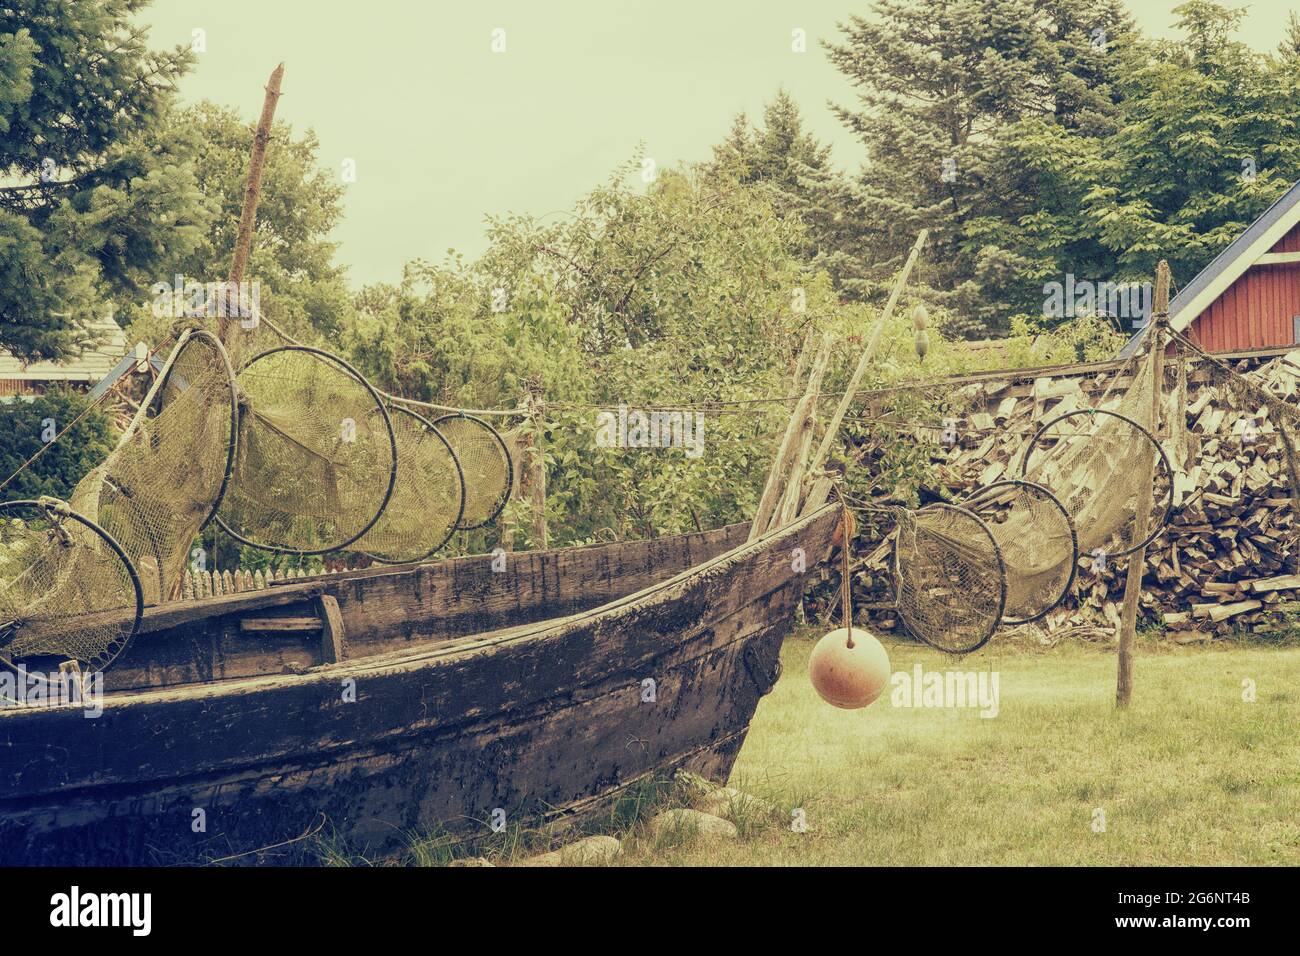 Old wooden fishing boat with drying up fishing nets. Vintage filter effect Stock Photo